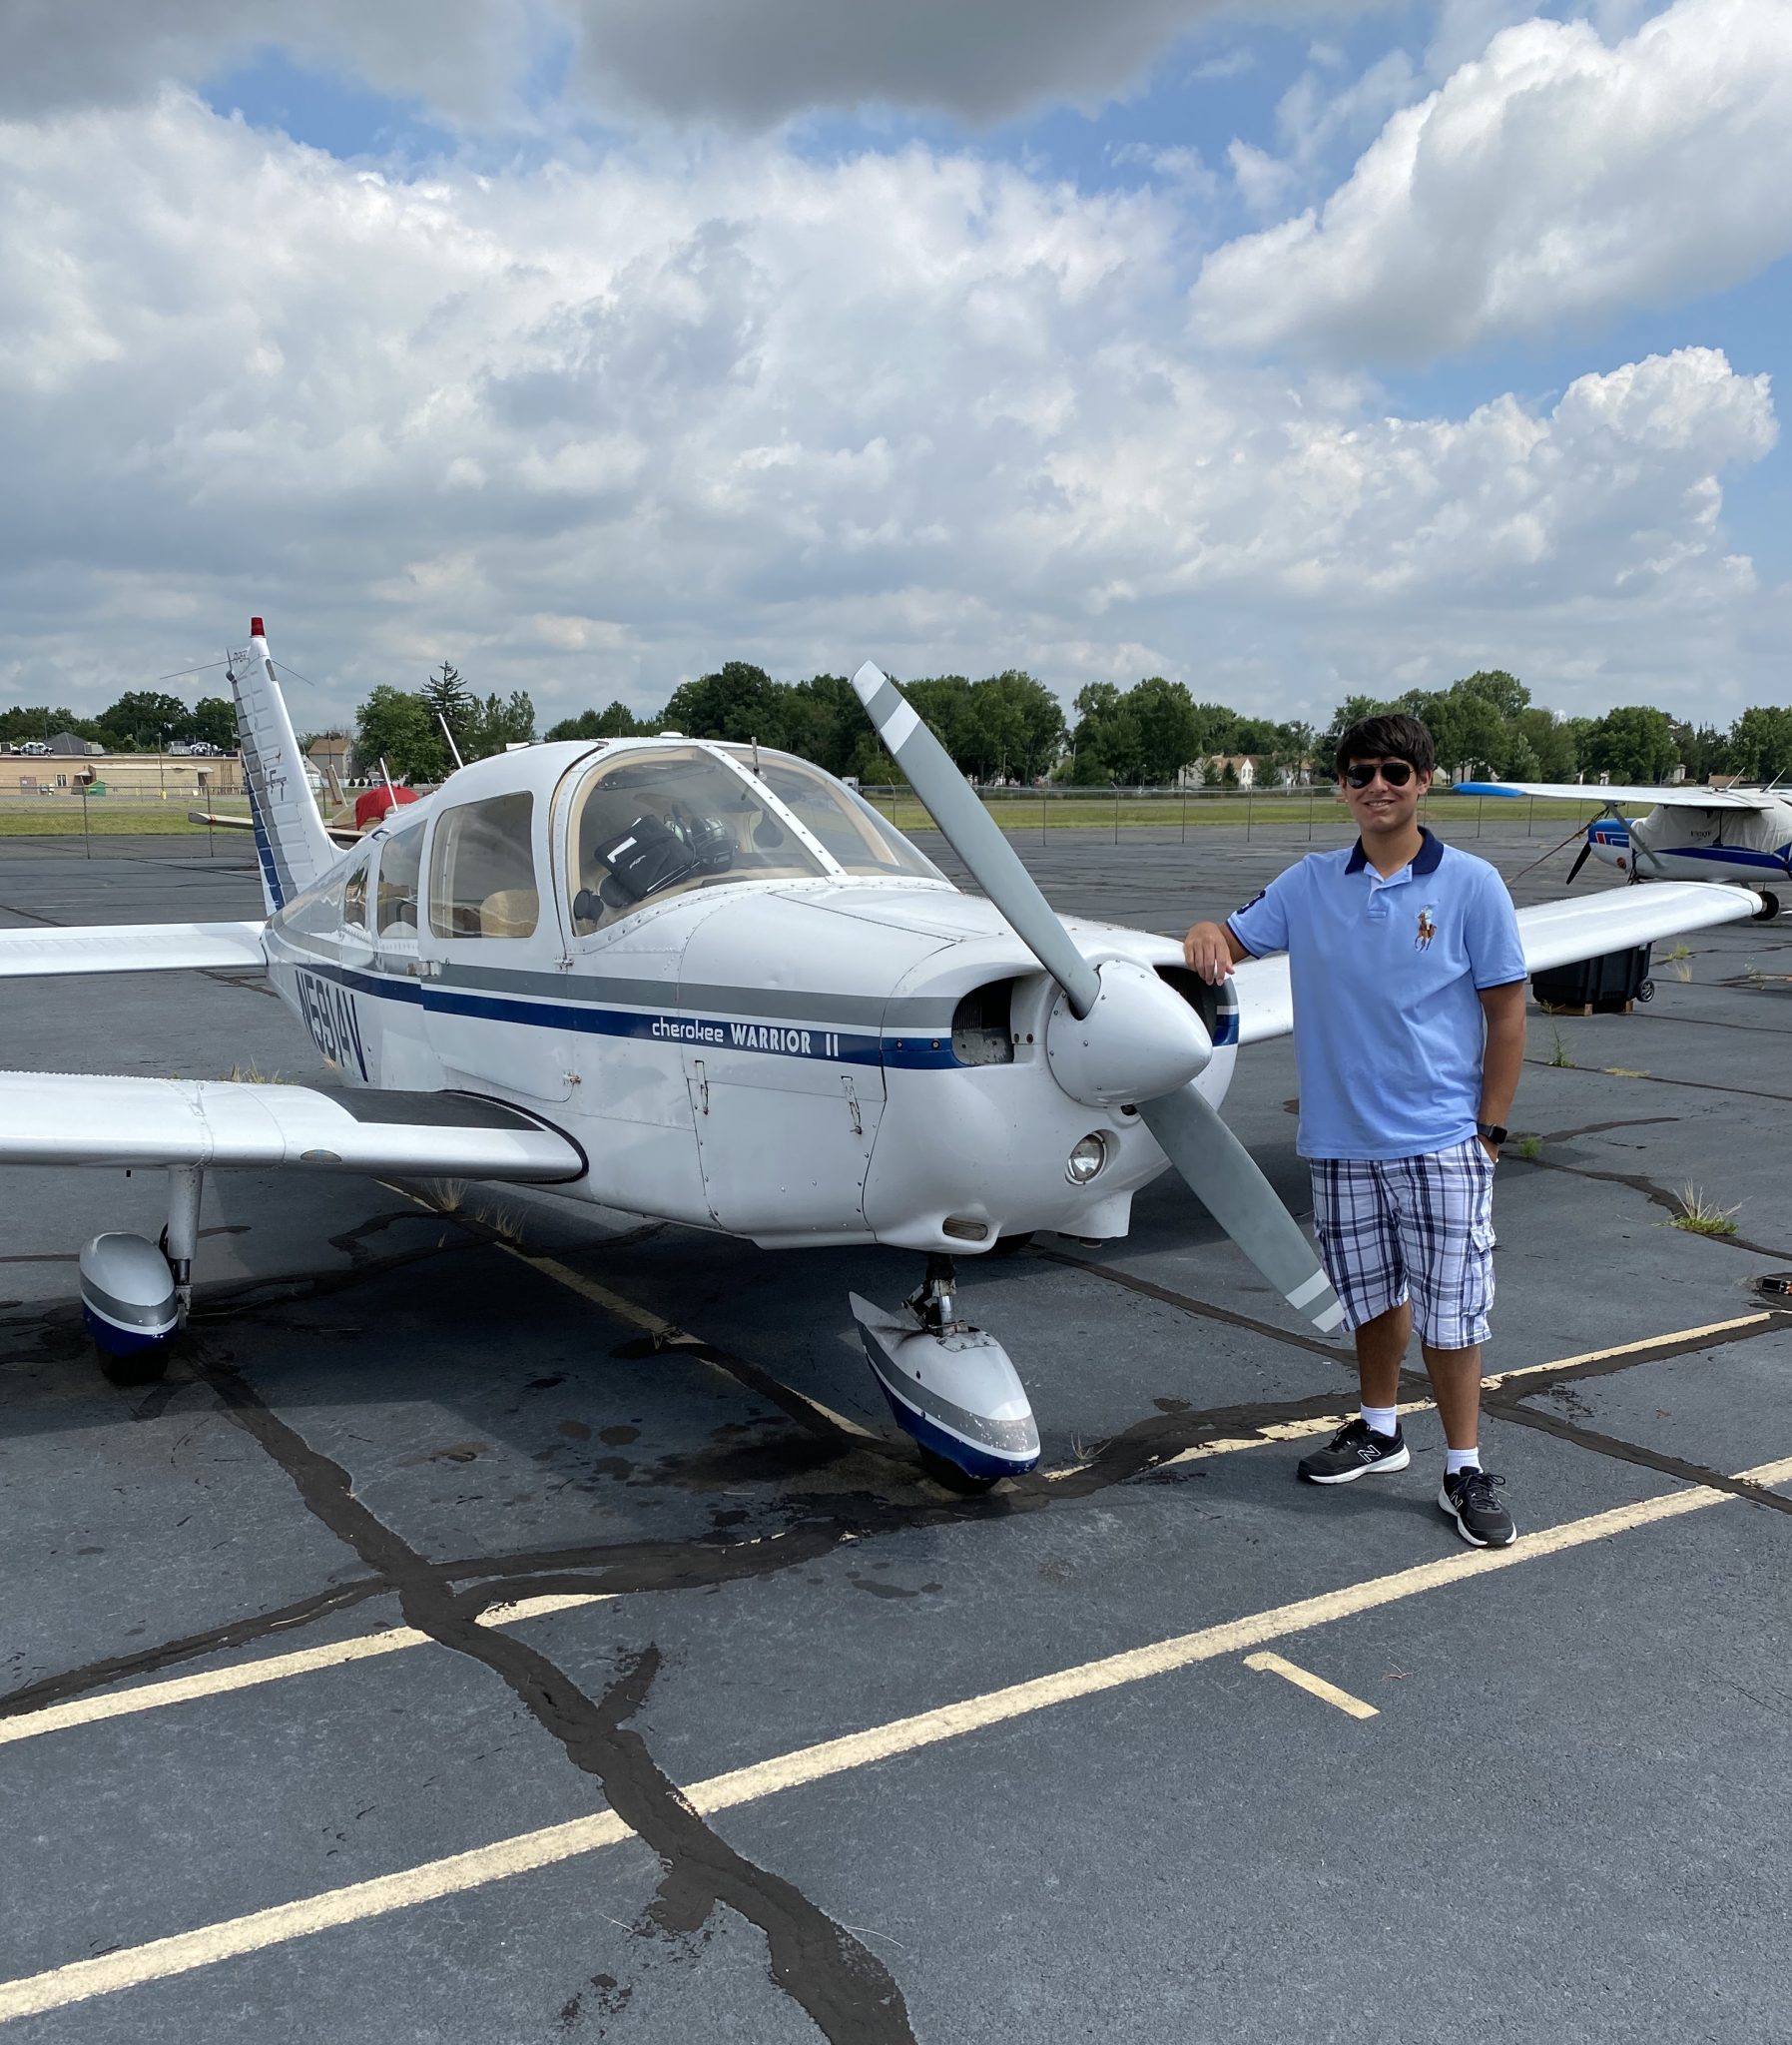 Jay poses in front of a airplane.